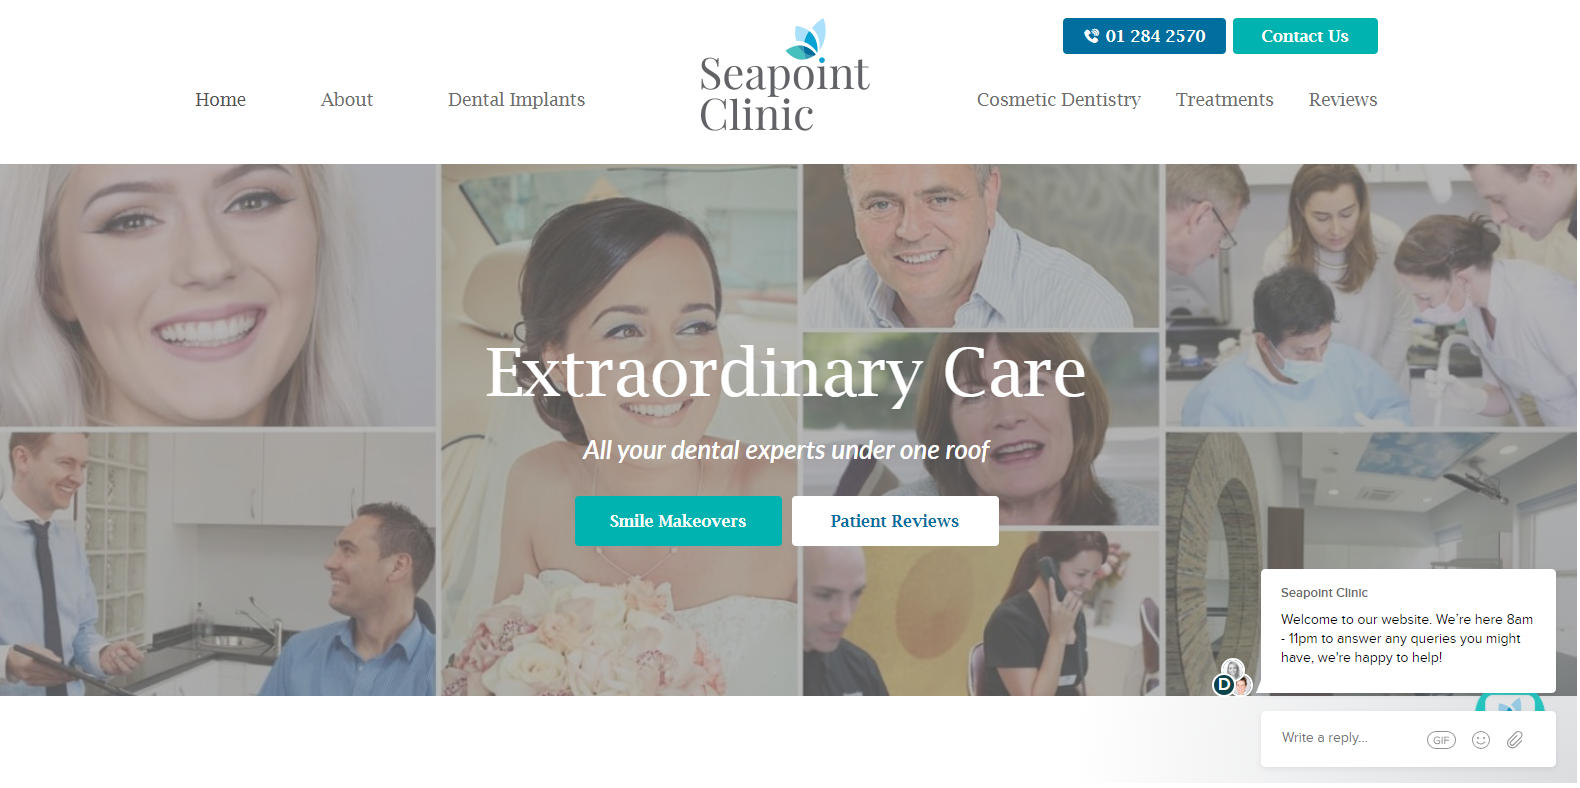 Seapoint Clinic